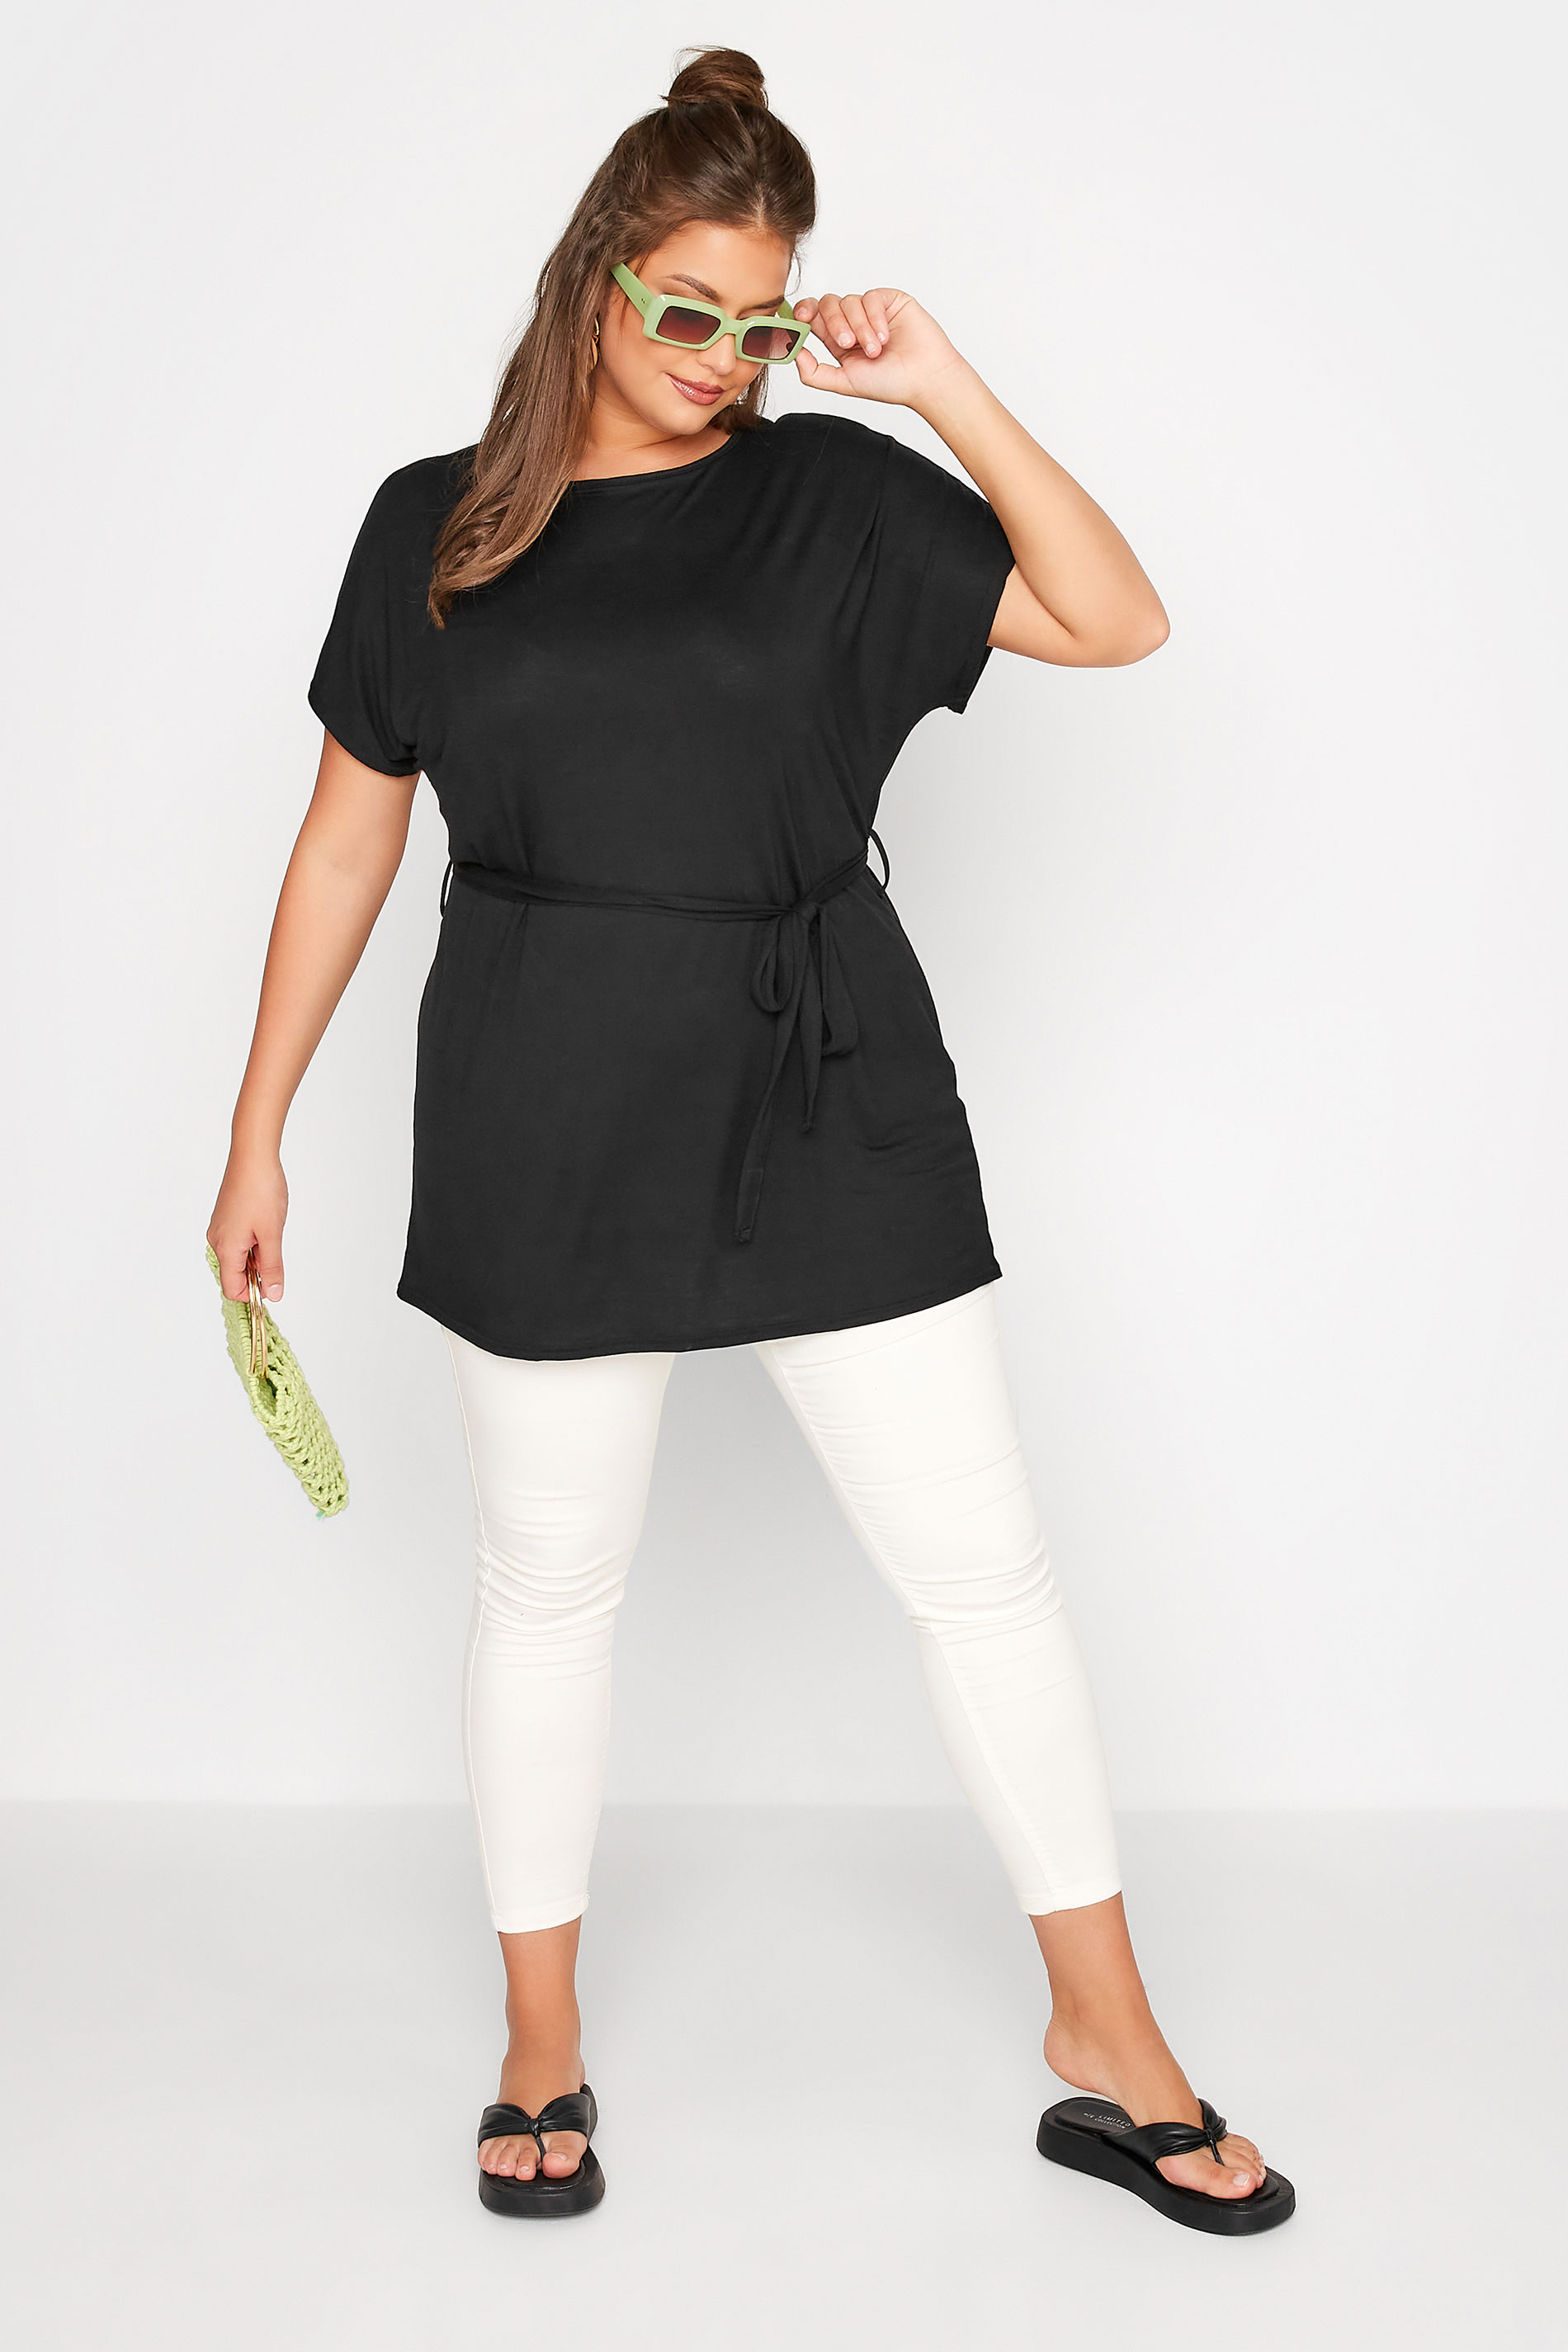 Grande taille  Tops Grande taille  Tops Casual | LIMITED COLLECTION Curve Black Waist Tie Top - XU07231